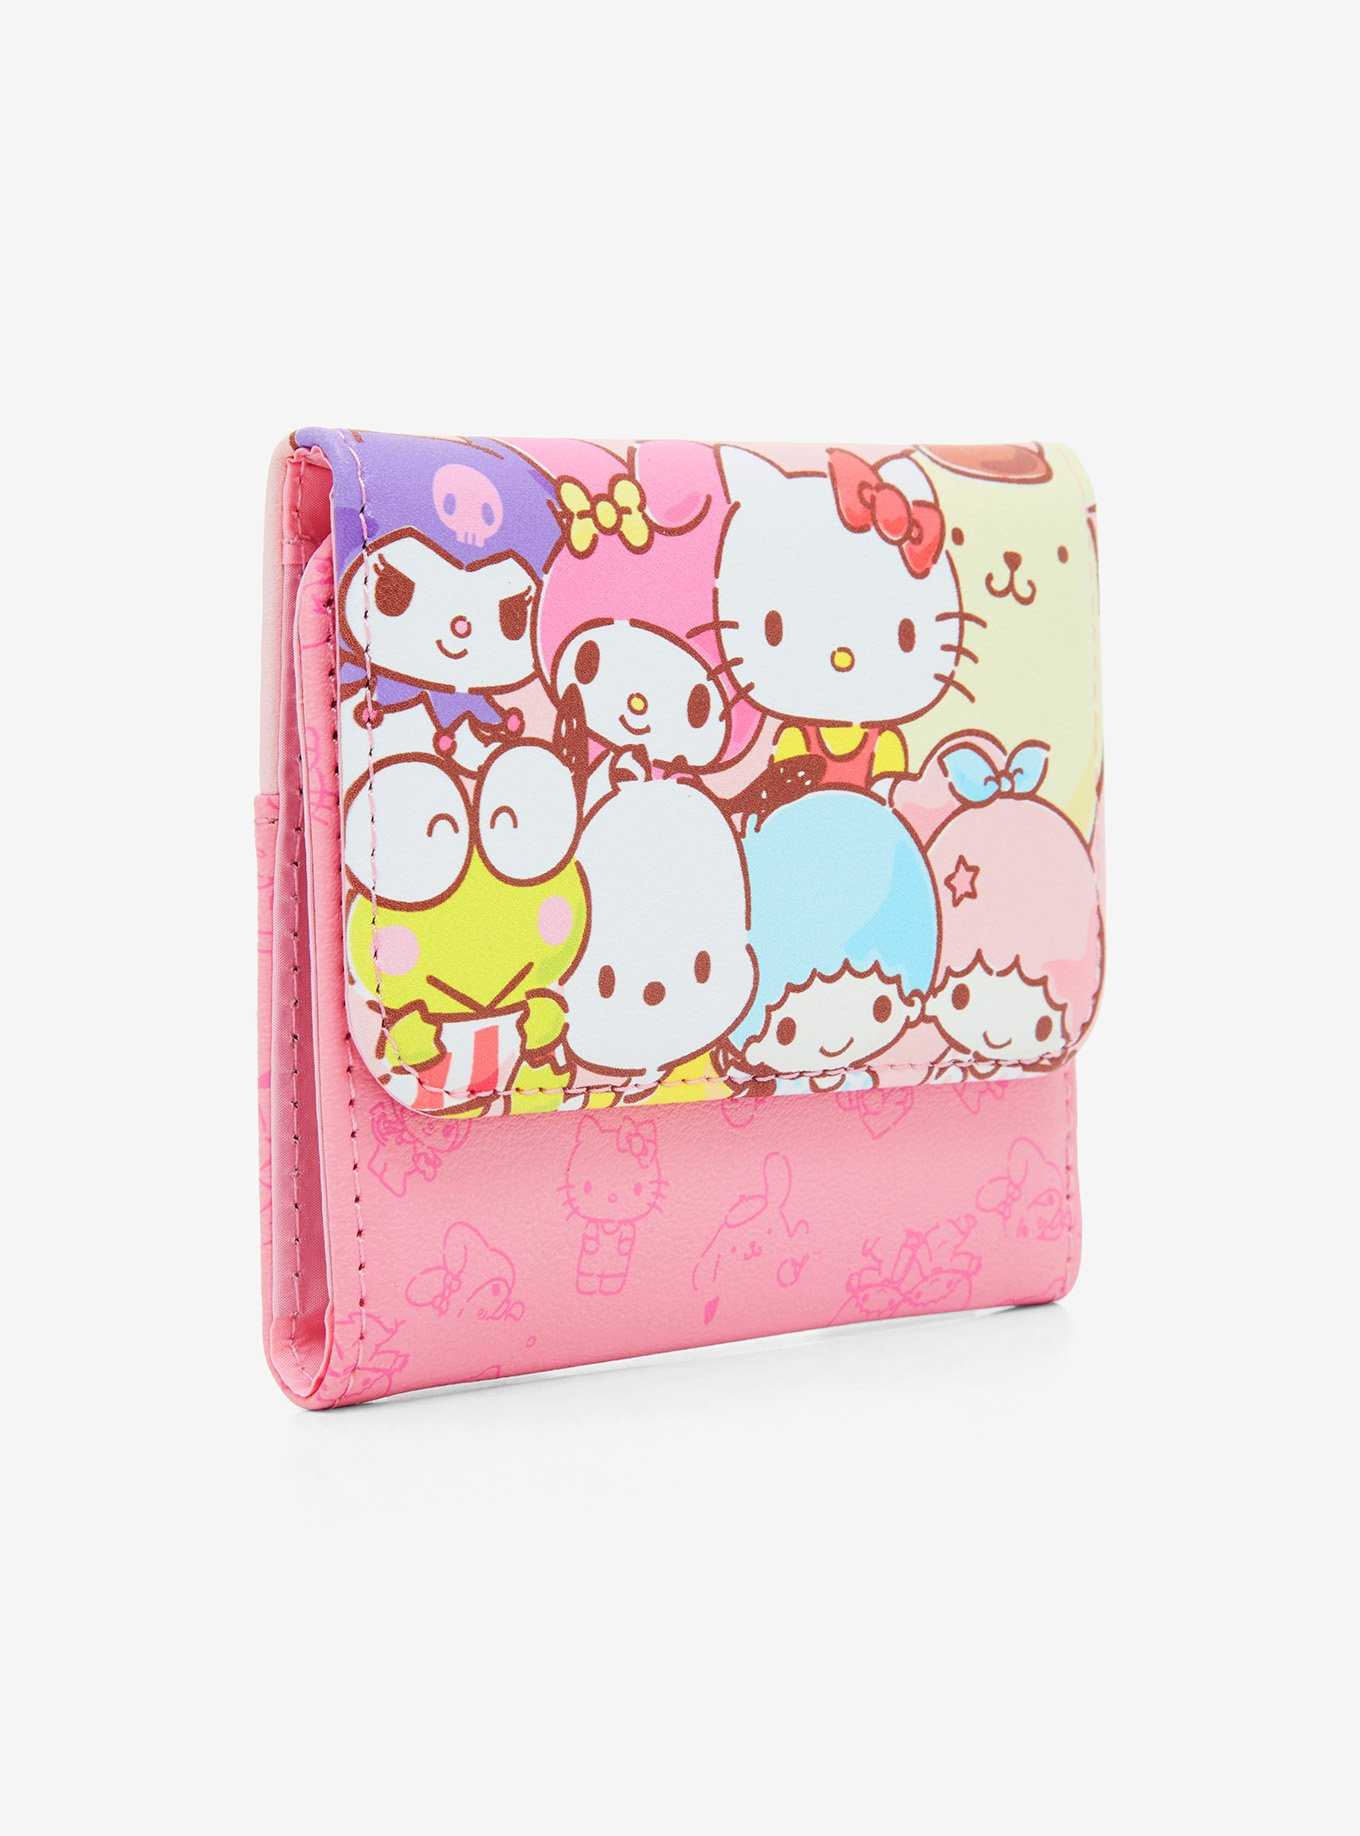 Loungefly Hello Kitty And Friends Pink Mini Flap Wallet, , hi-res